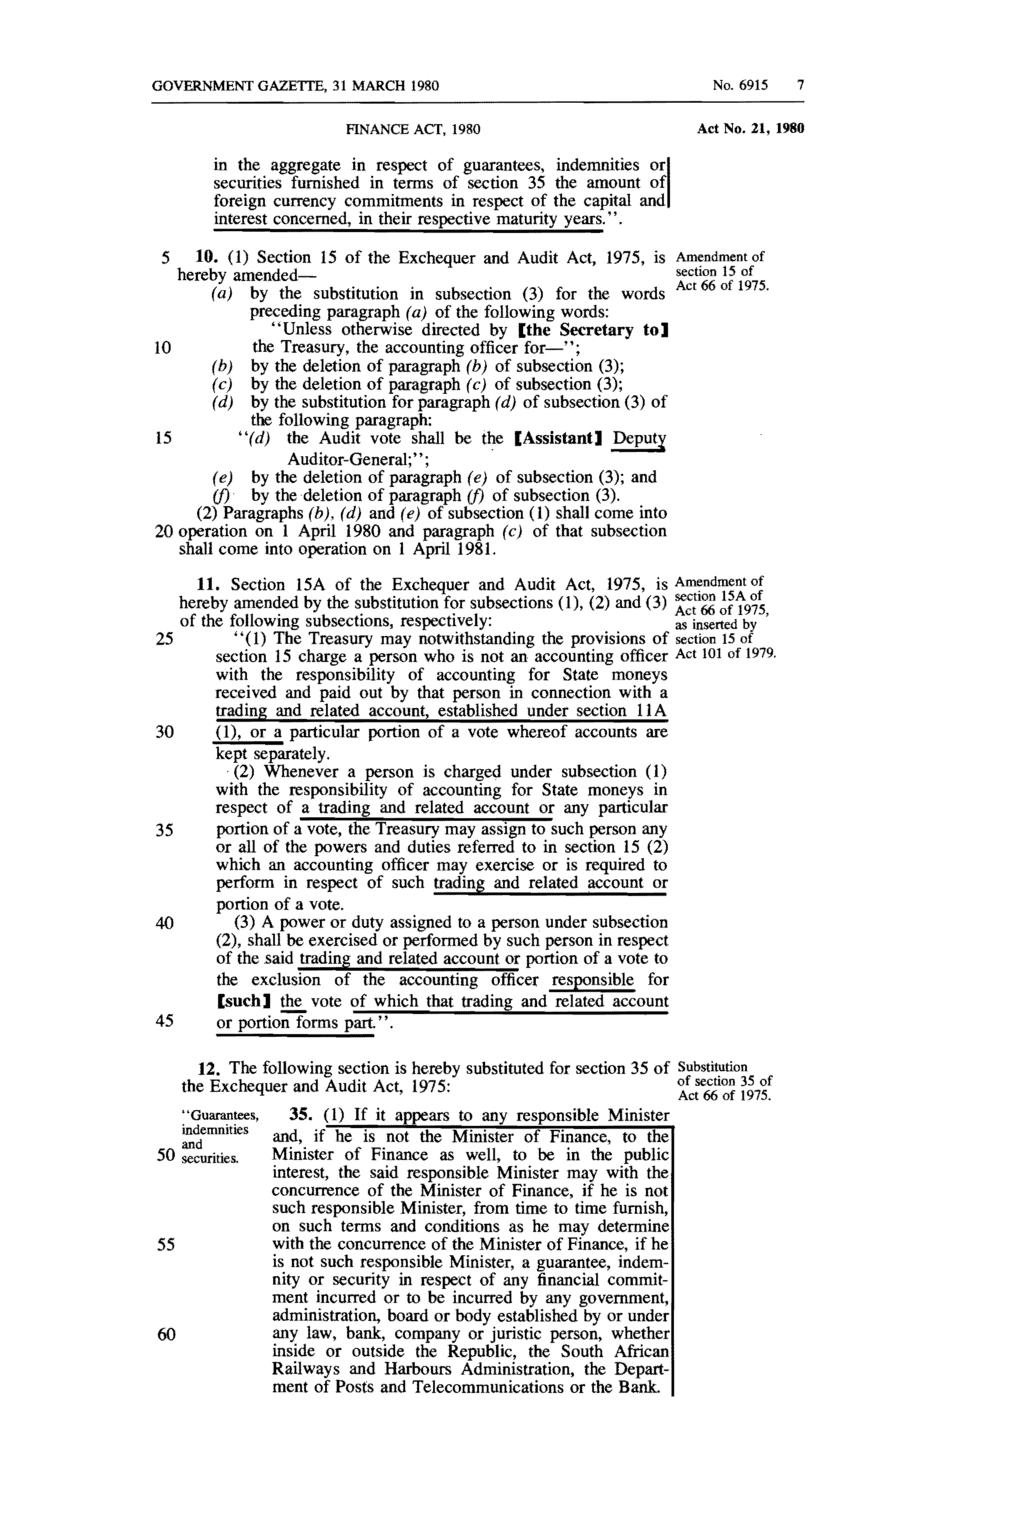 GOVERNMENT GAZETTE, 31 MARCH 1980 No. 6915 7 FINANCE ACT, 1980 Act No.